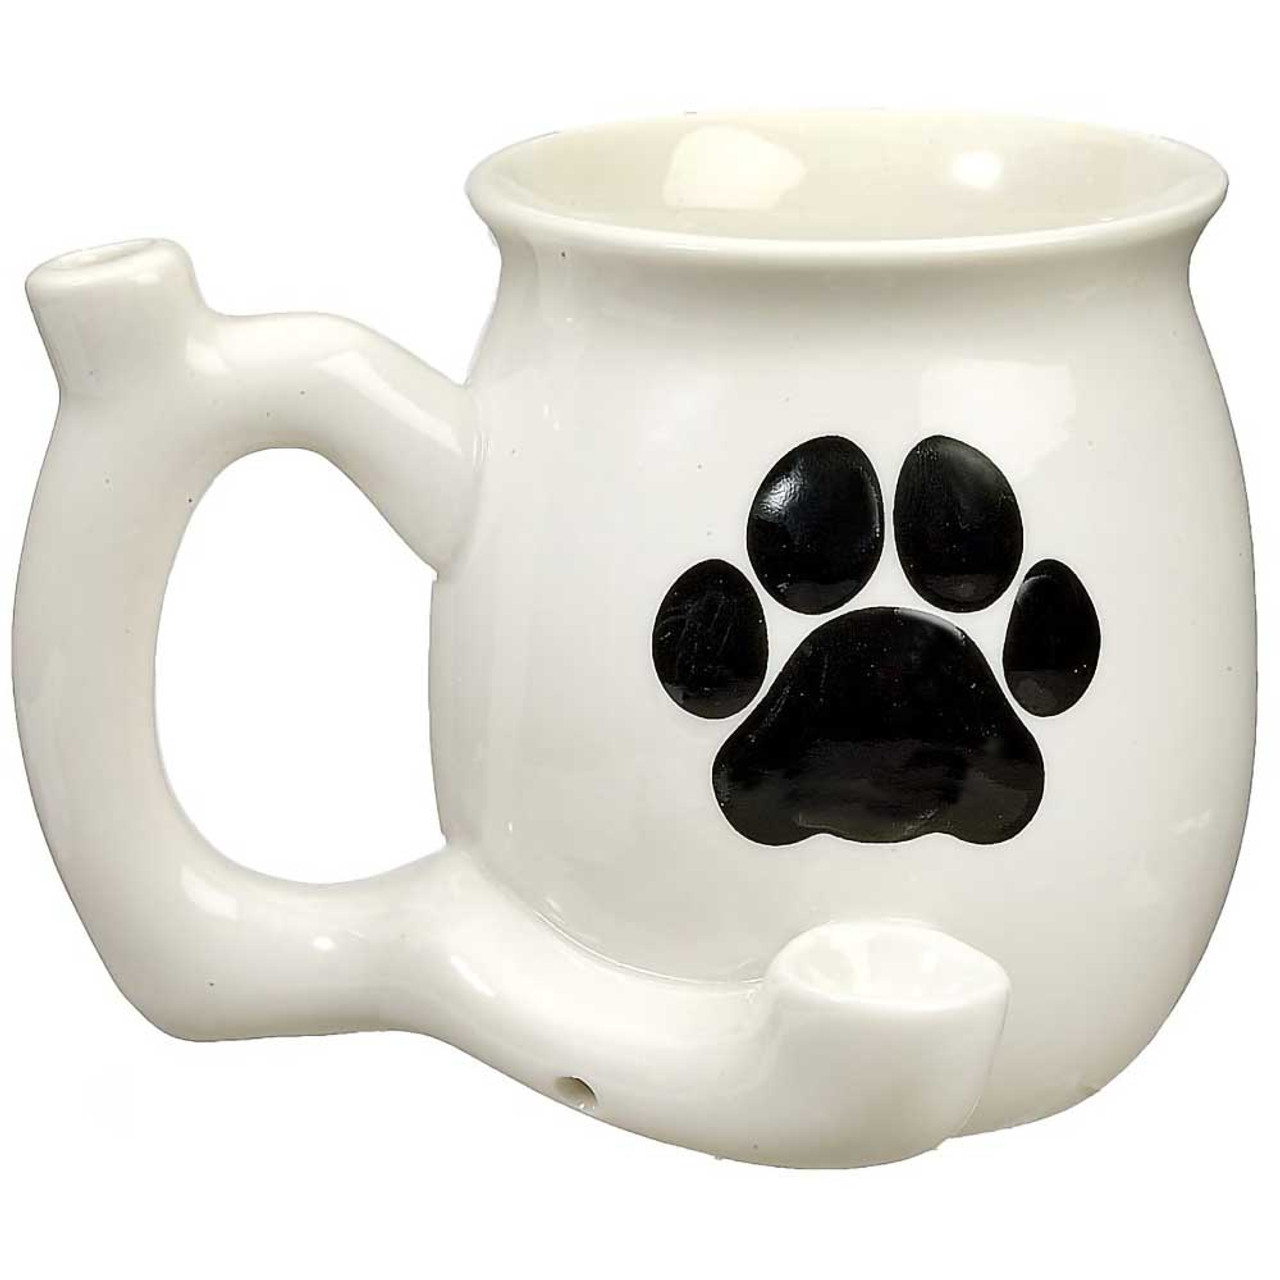 https://cdn11.bigcommerce.com/s-1n8r405nxd/images/stencil/1280x1280/products/9145/18695/21732-F1-Fashioncraft-Dog-Paw-Print-Coffee-Mug-Pipe-Ceramic-White-Product-Front__88228.1617630578.jpg?c=2